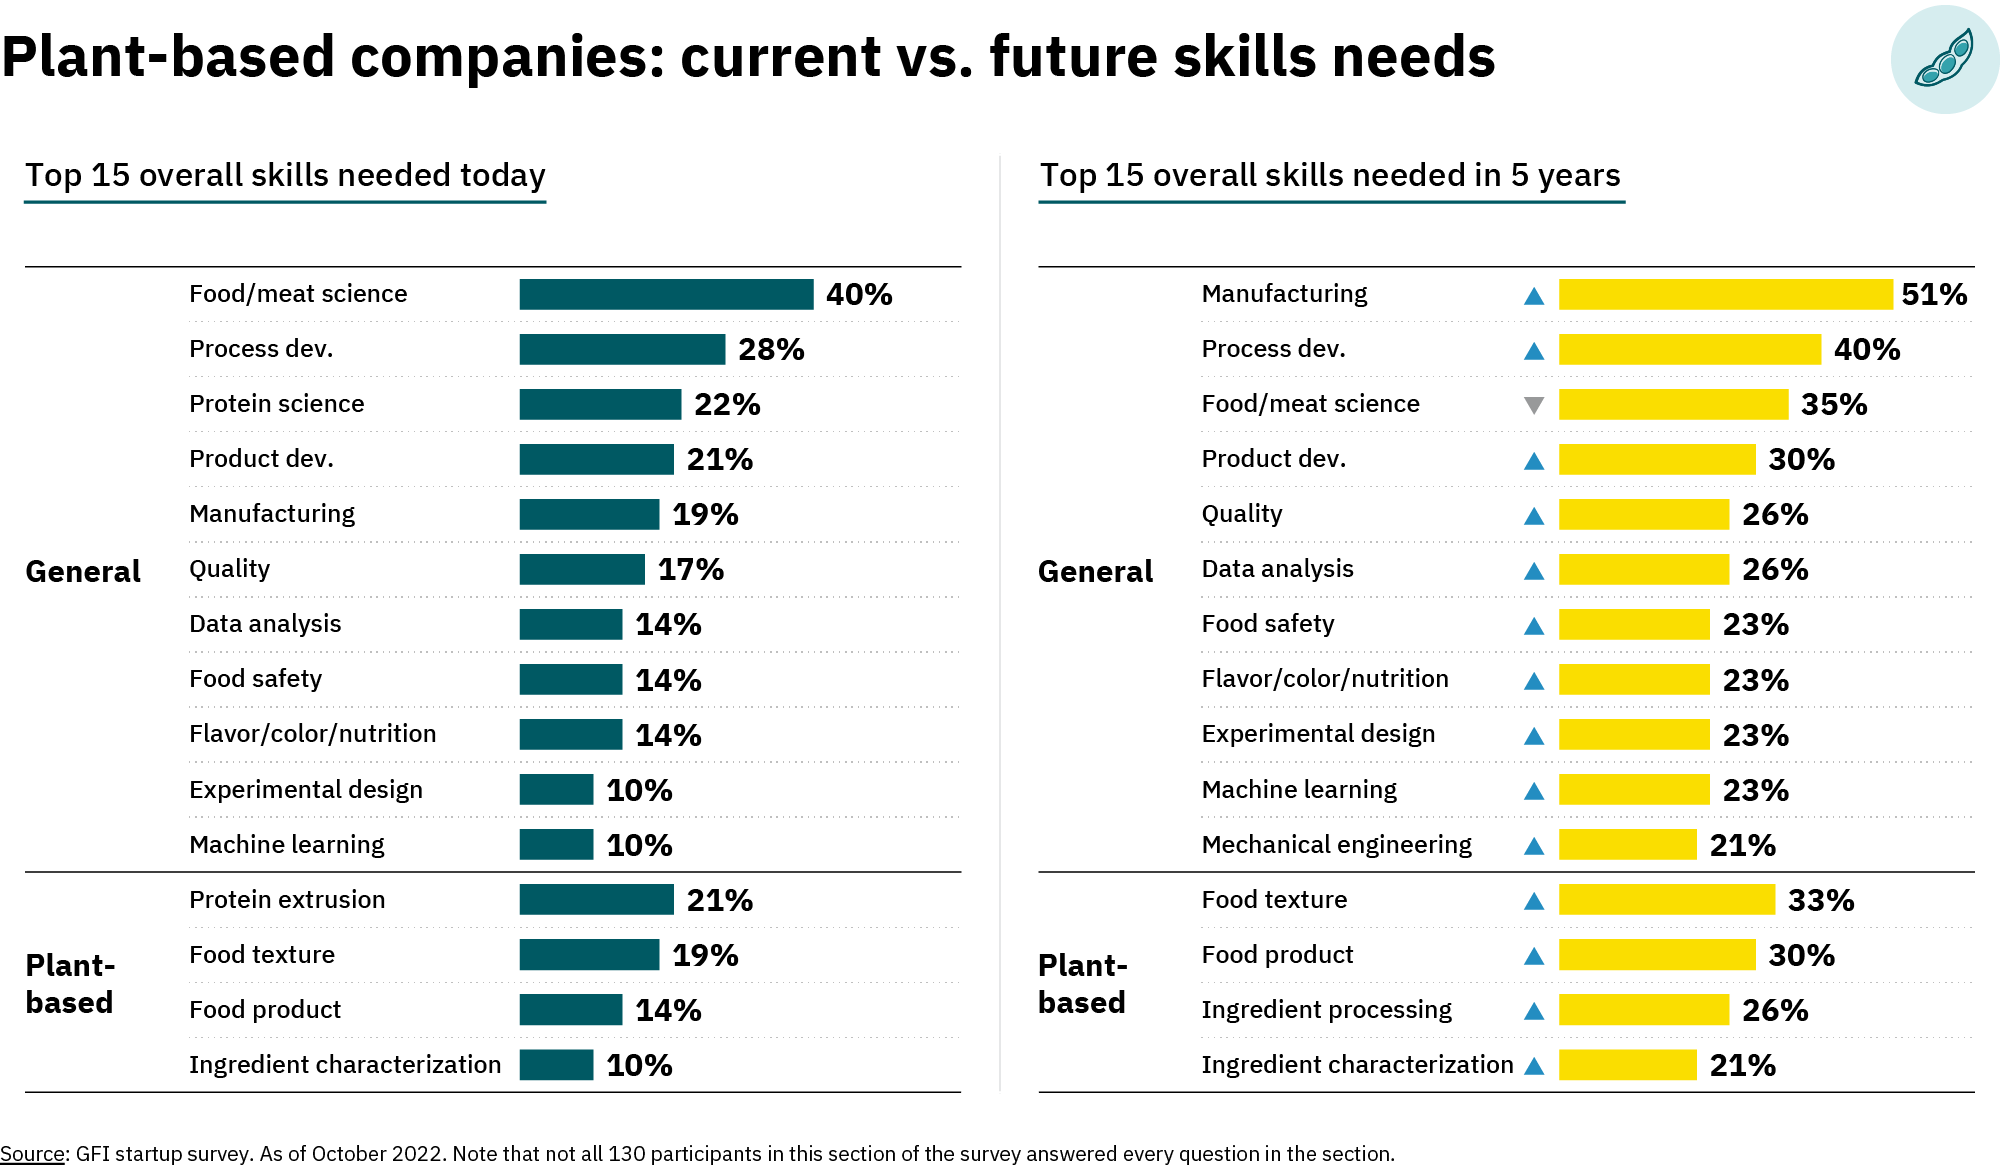 Plant-based companies: current vs. Future skills needs; top 15 overall skills needed today - general: food/meat science 40%, process dev. 28%, protein science 22%, product dev 21%, manufacturing 19%, quality 17%, data analysis 14%, food safety 14%, flavor/color/nutrition 14%, experimental design 10%, machine learning 10%; plant-based: protein extrusion 21%, food texture 19%, food product 14%, ingredient characterization 10%; top 15 overall skills needed in 5 years - general: manufacturing 51%, process dev. 40%, food/meat science 35%, product dev 30%, quality 26%, data analysis 26%, flavor/color/nutrition 23%, experimental design 23%, machine learning 23%, mechanical engineering 21%